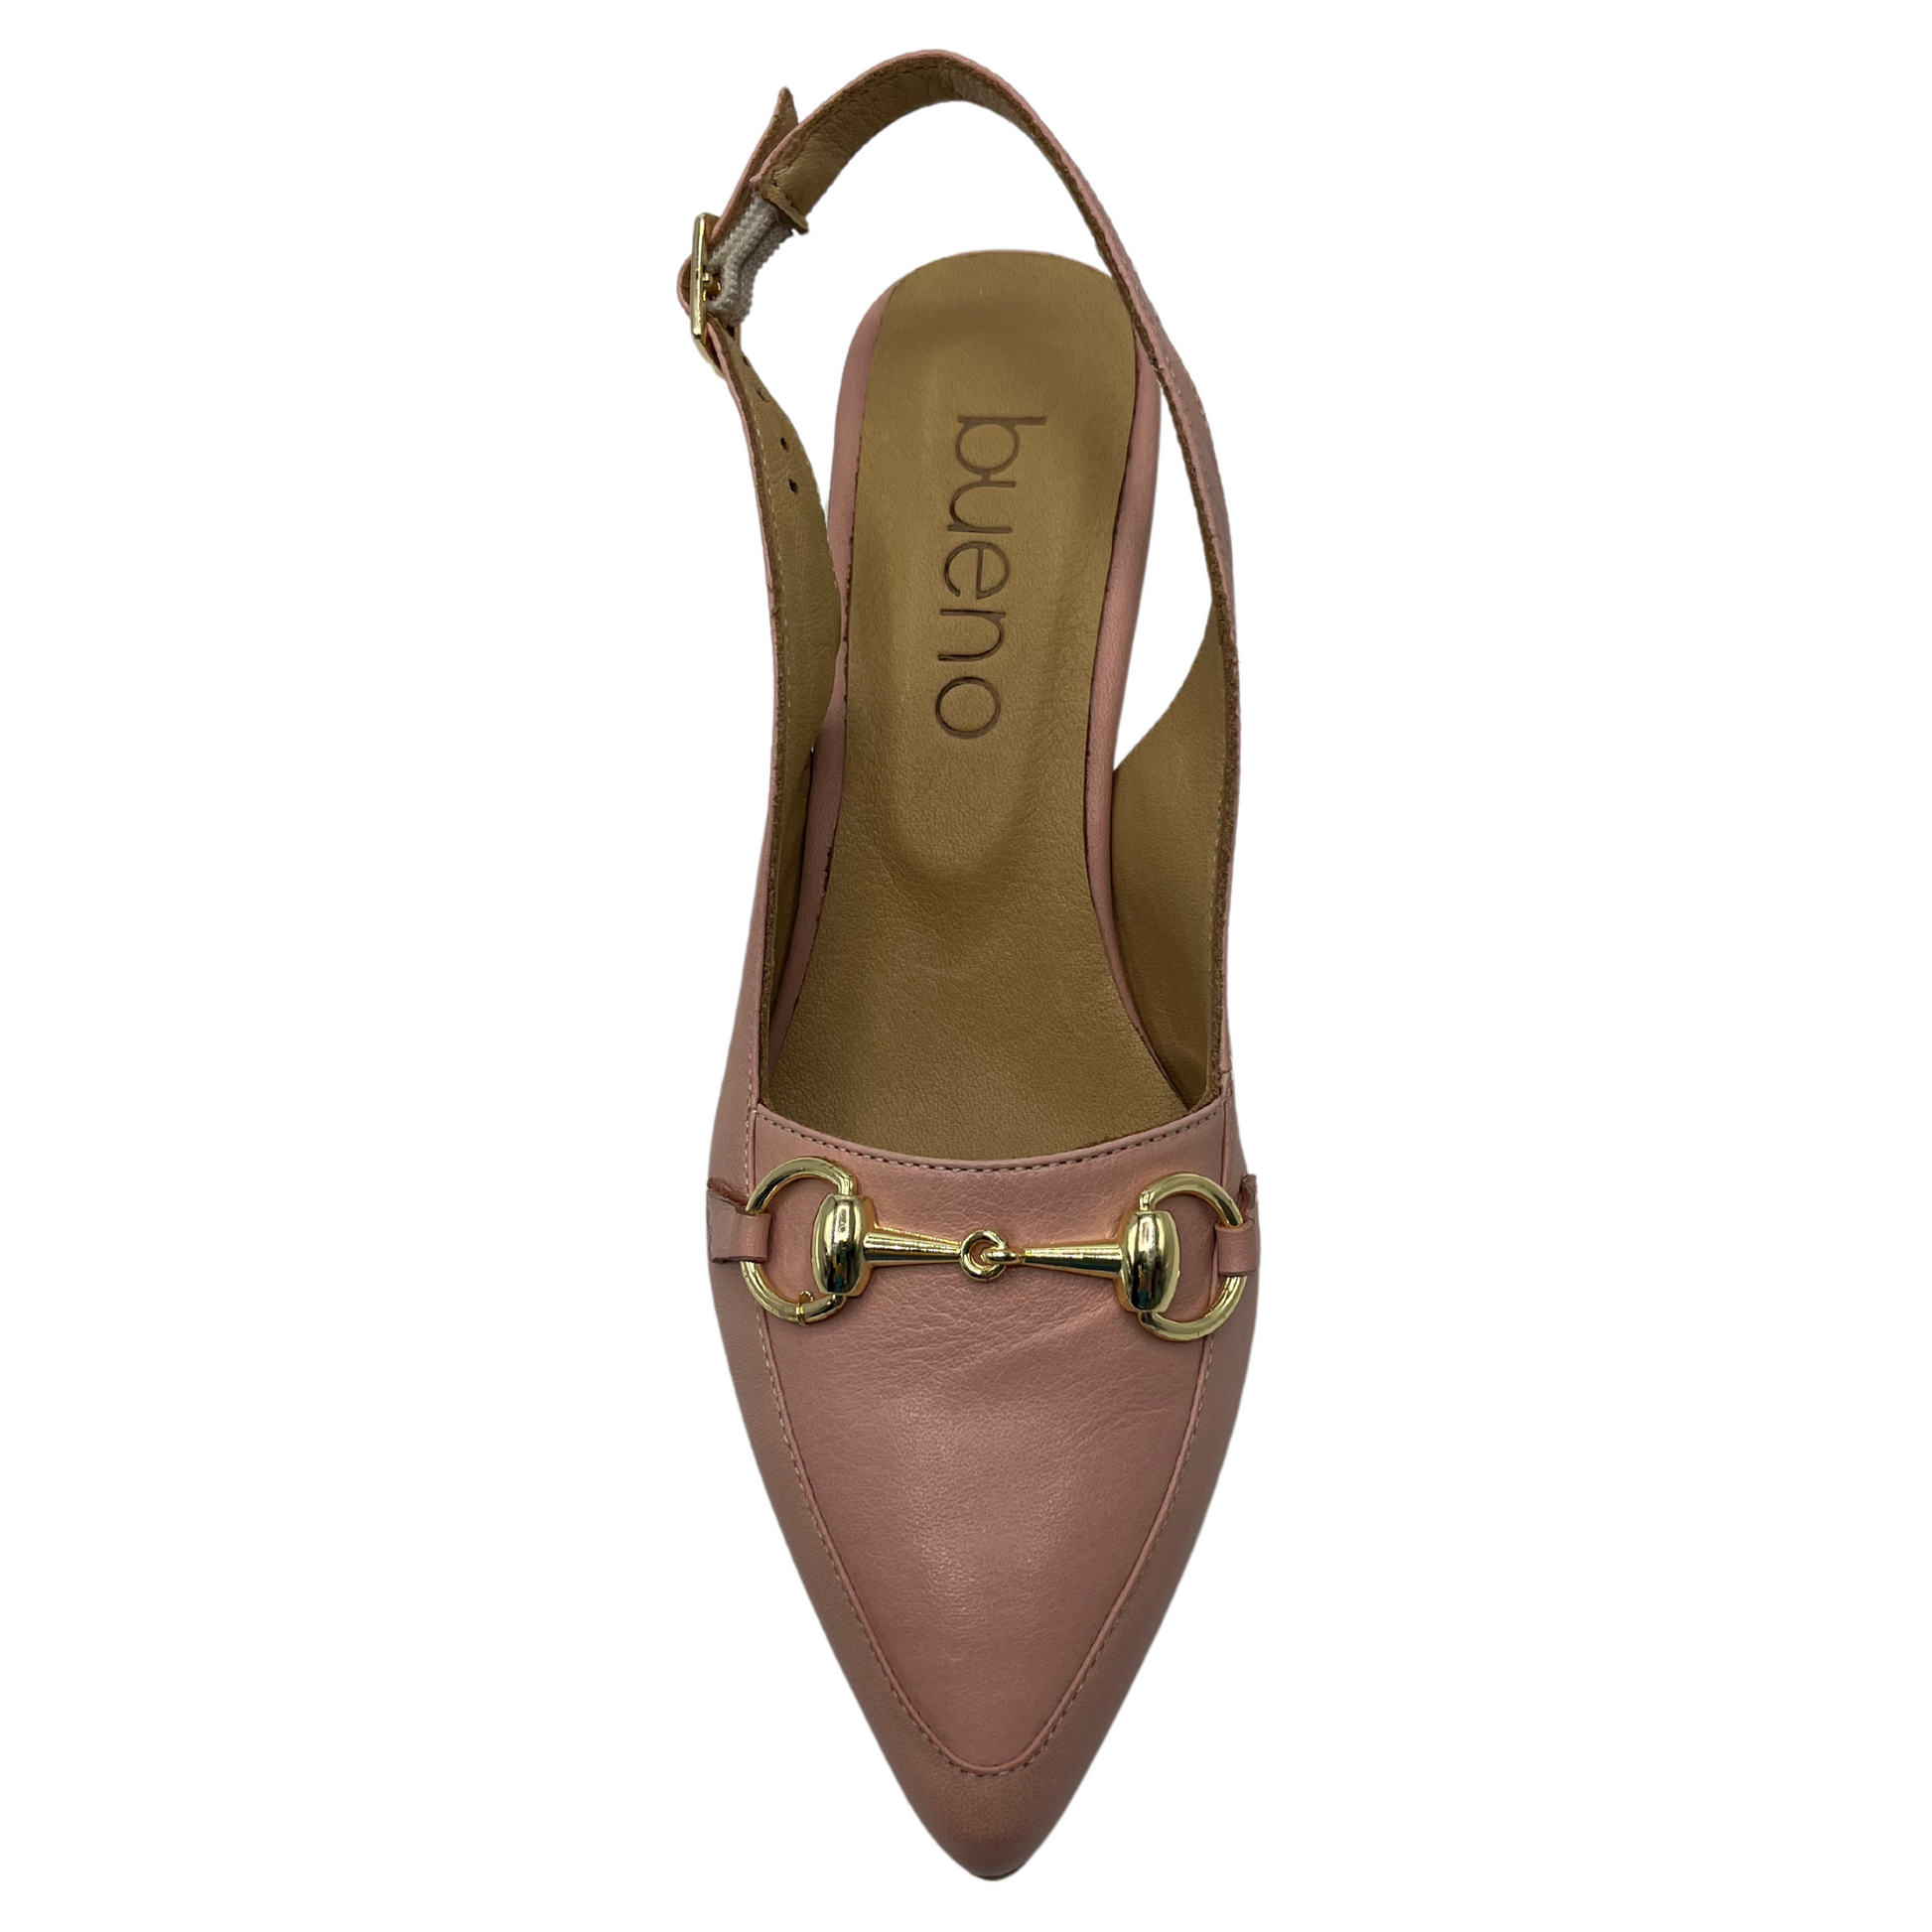 Top view of peach leather shoe with pointed toe and gold bit detail on upper